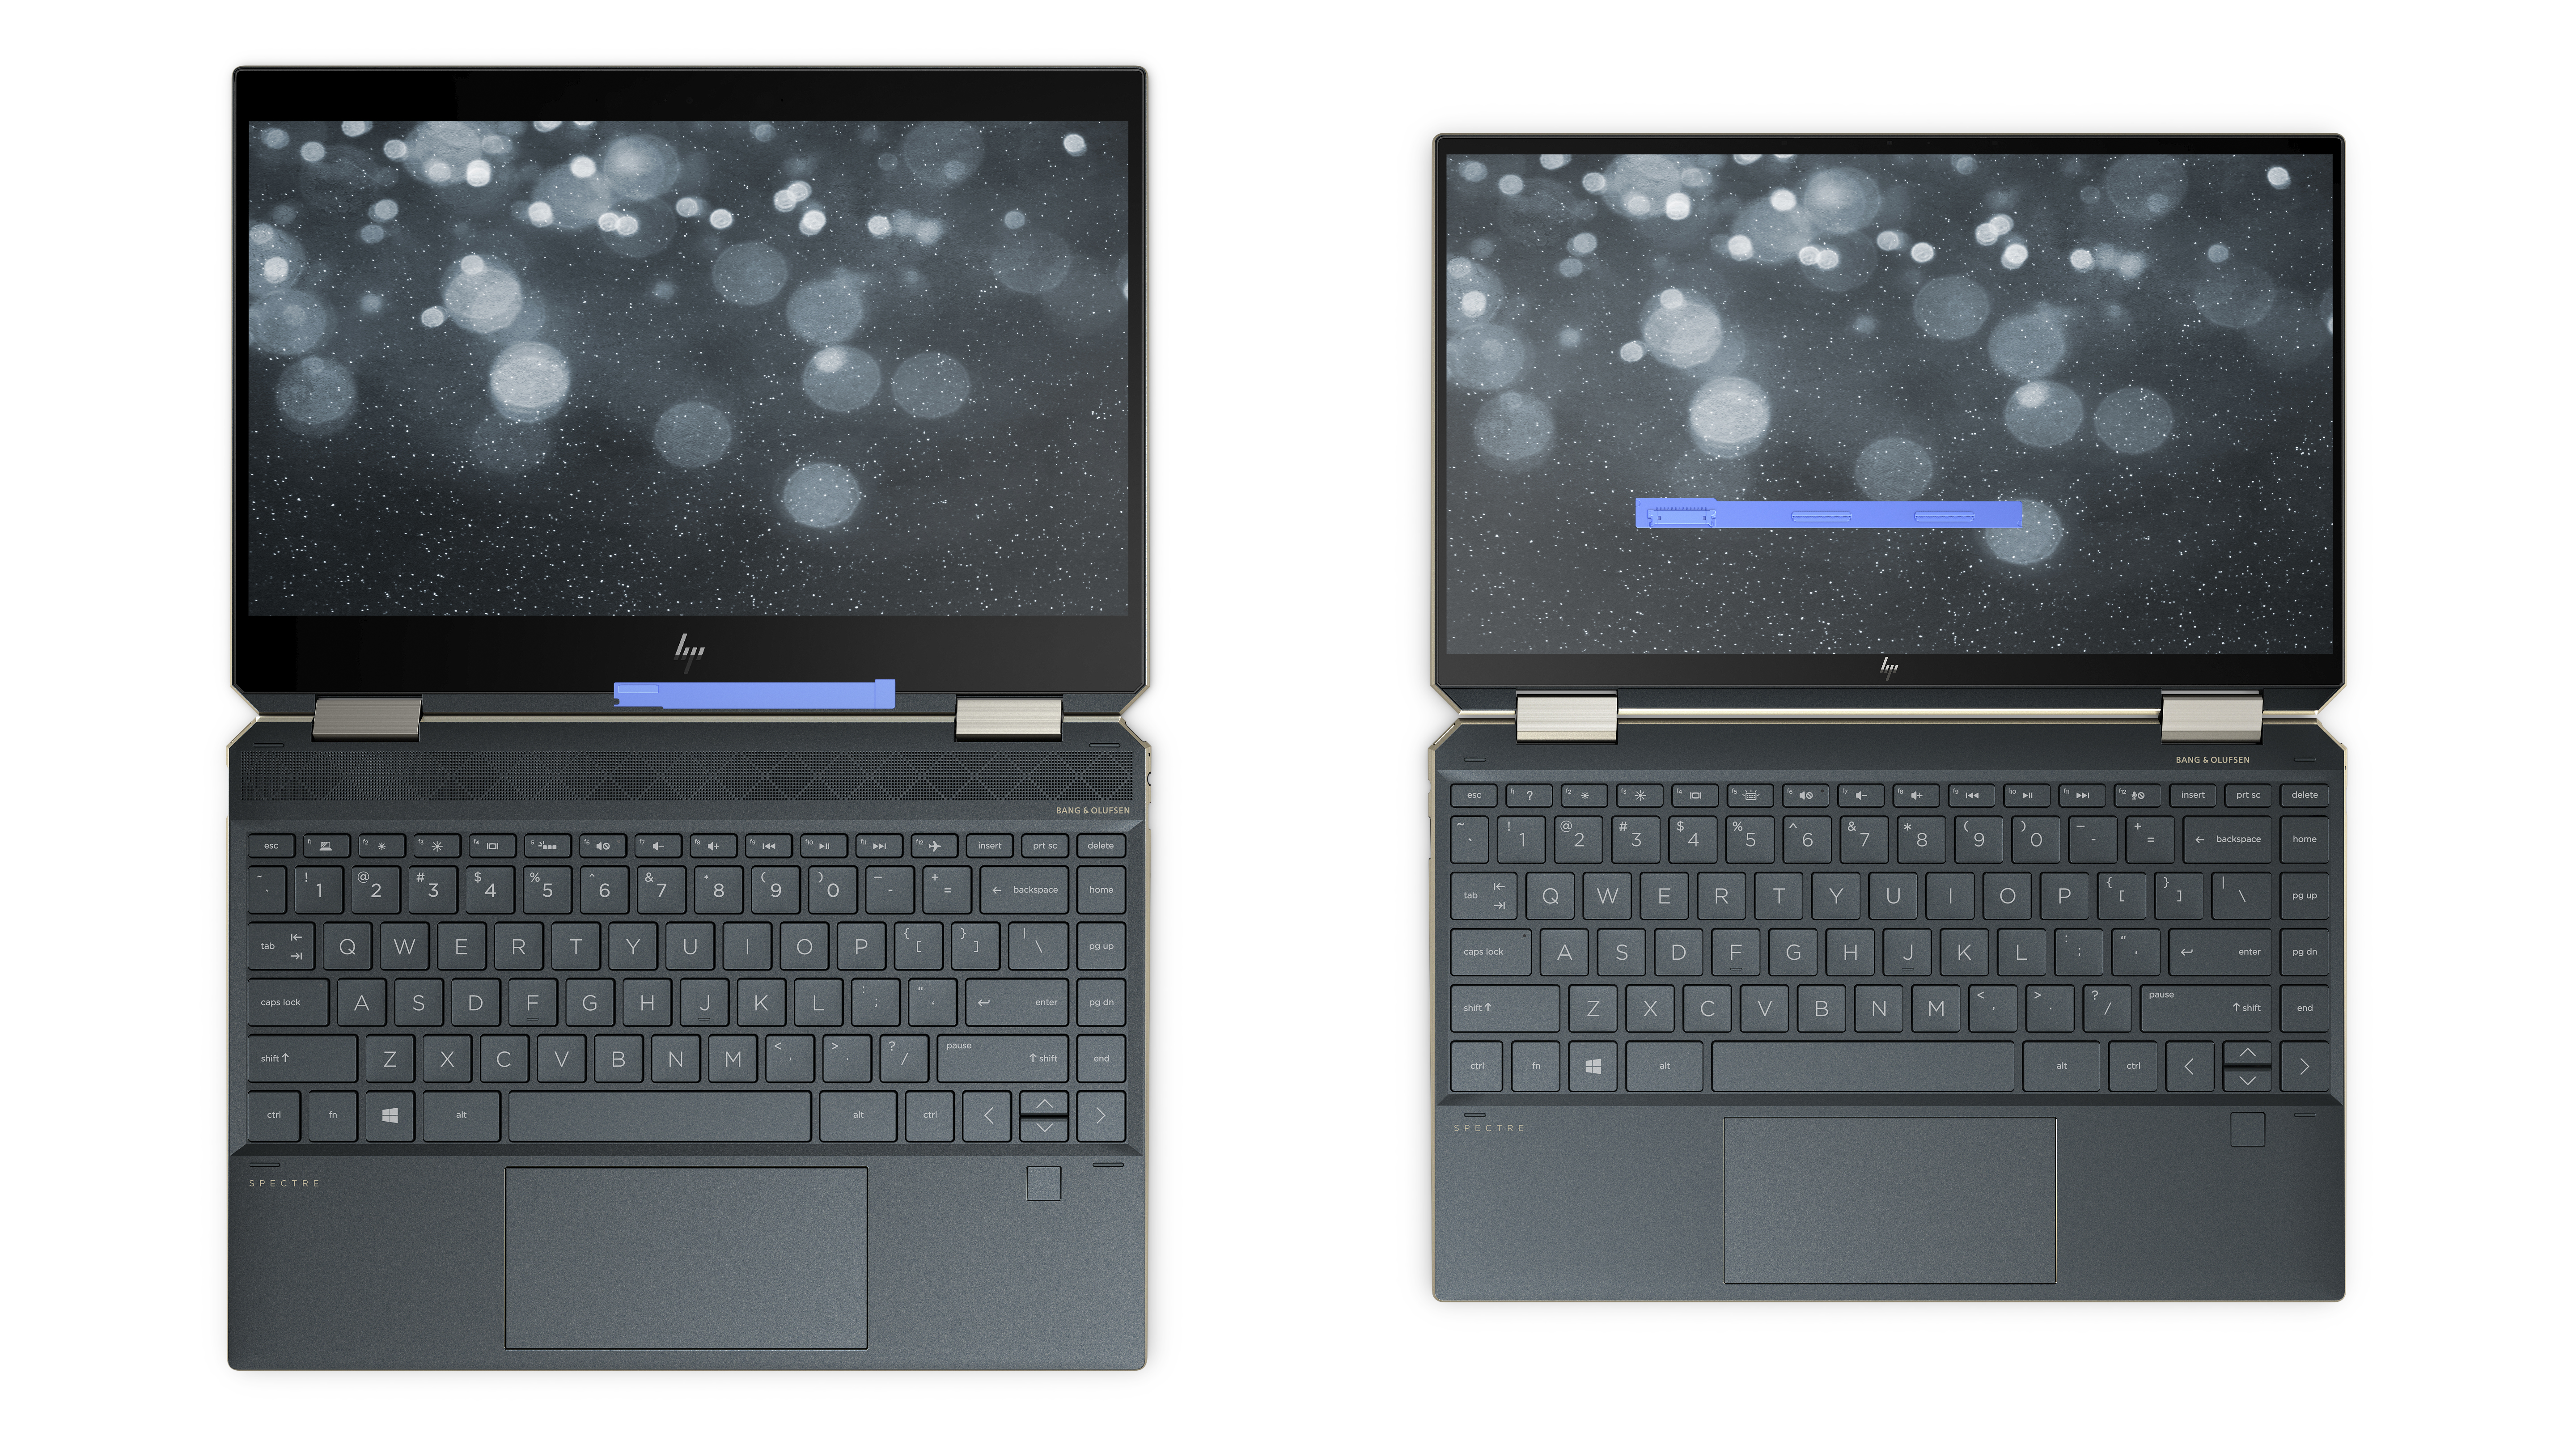 HP Spectre x360 13: The New Standard for Premium